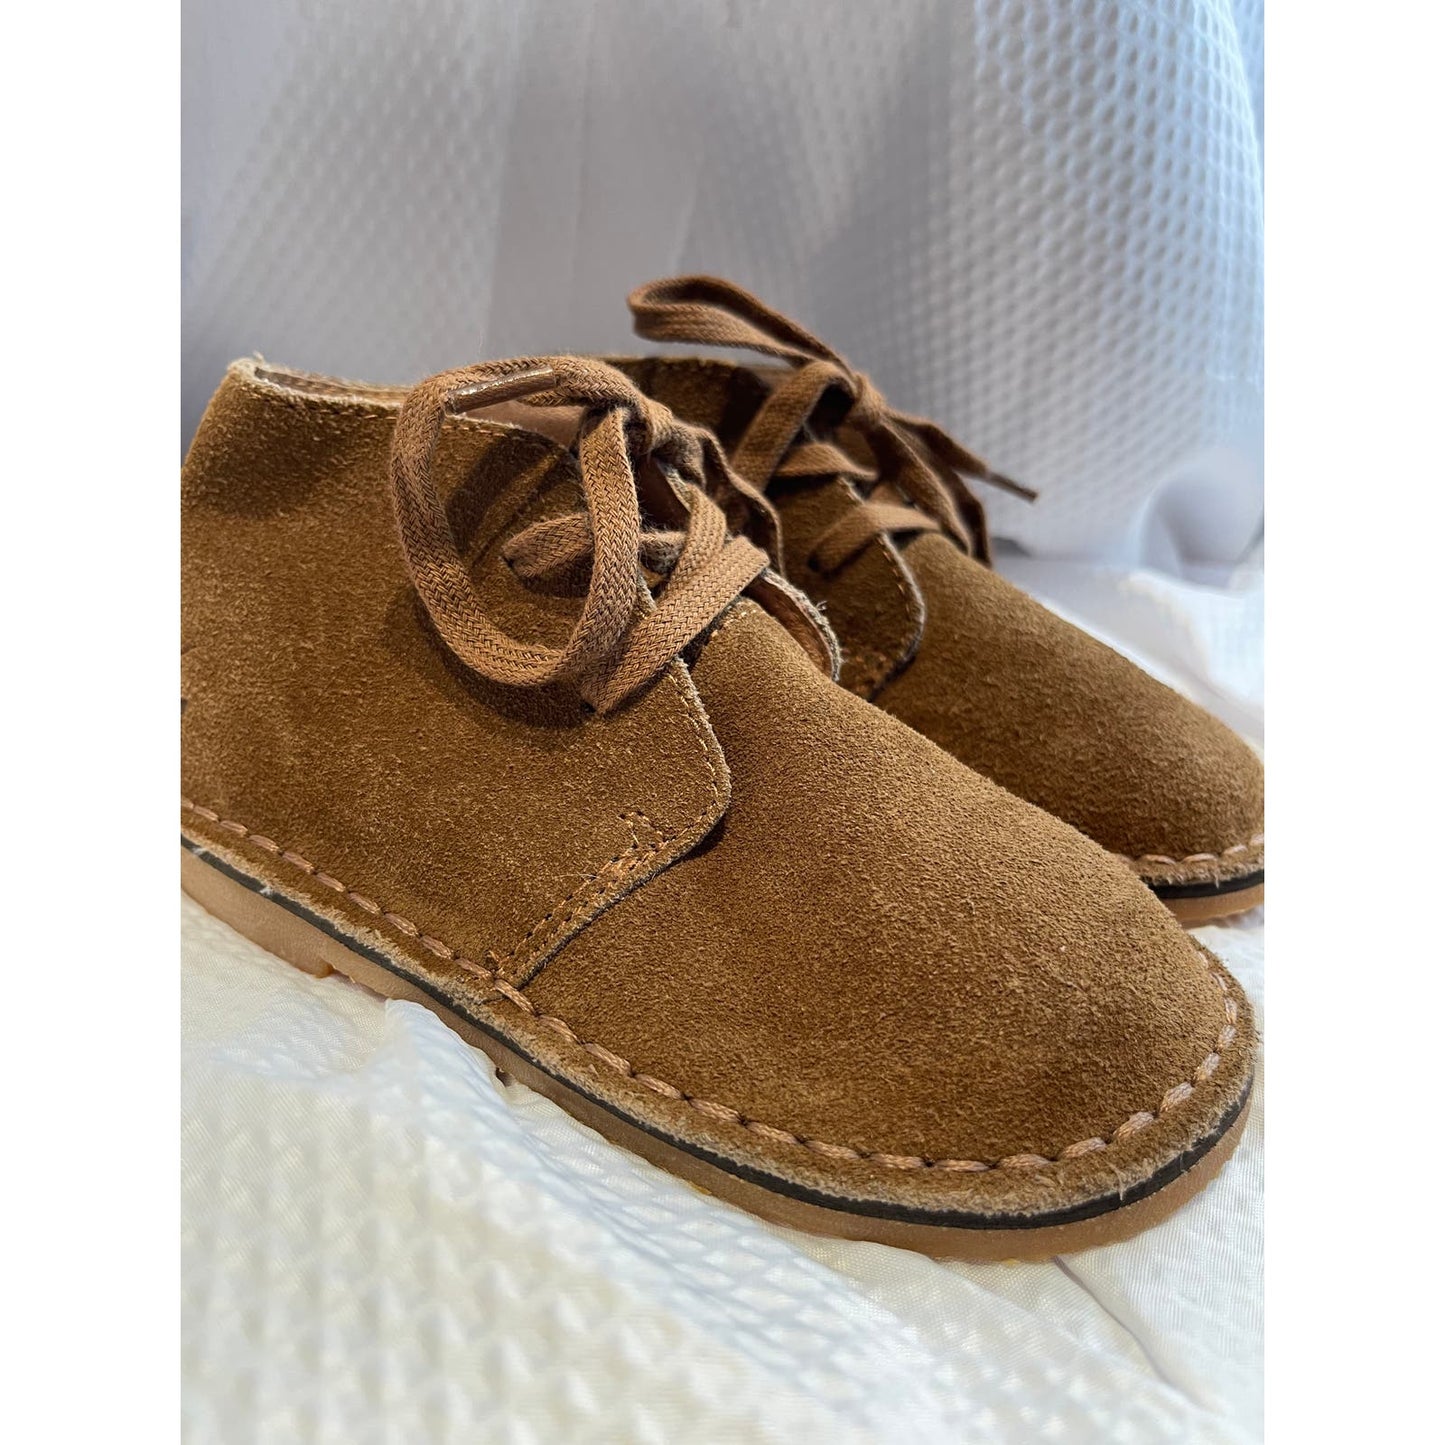 NEW Polo Ralph Lauren Toddler 7.5 Brown Leather Suede Chukka Bootie